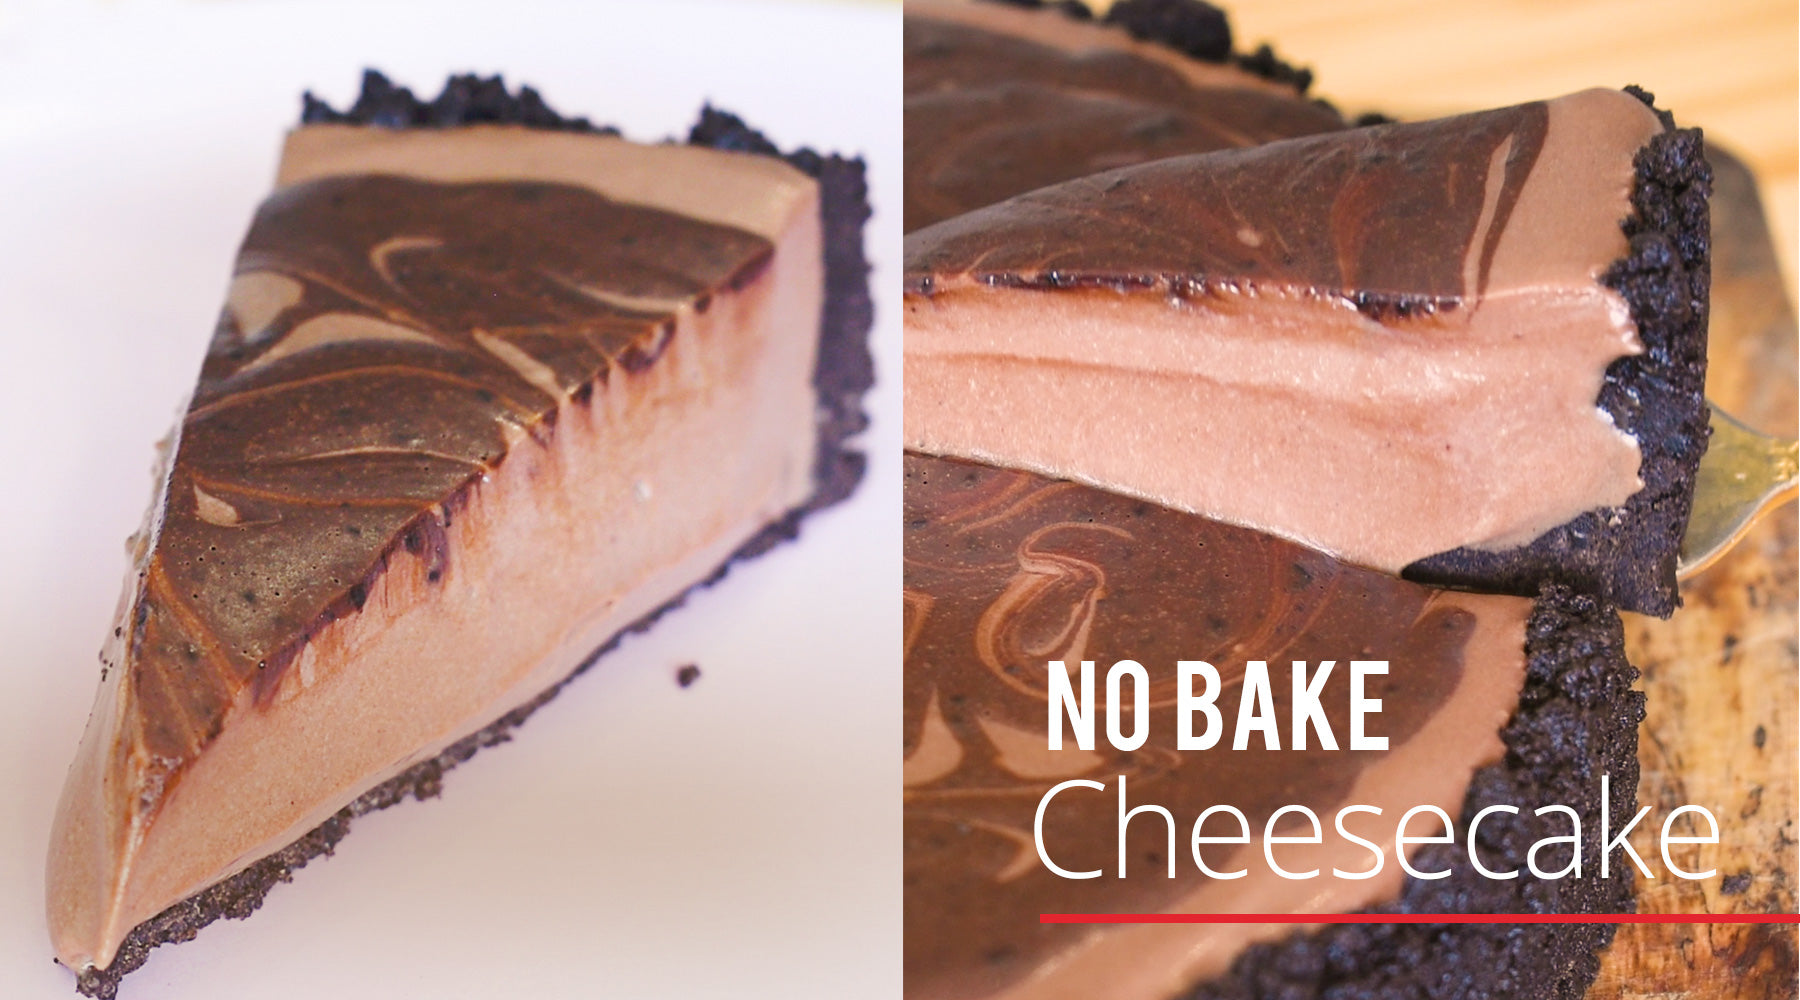 Deeliver No Bake Death by Chocolate Cheesecake